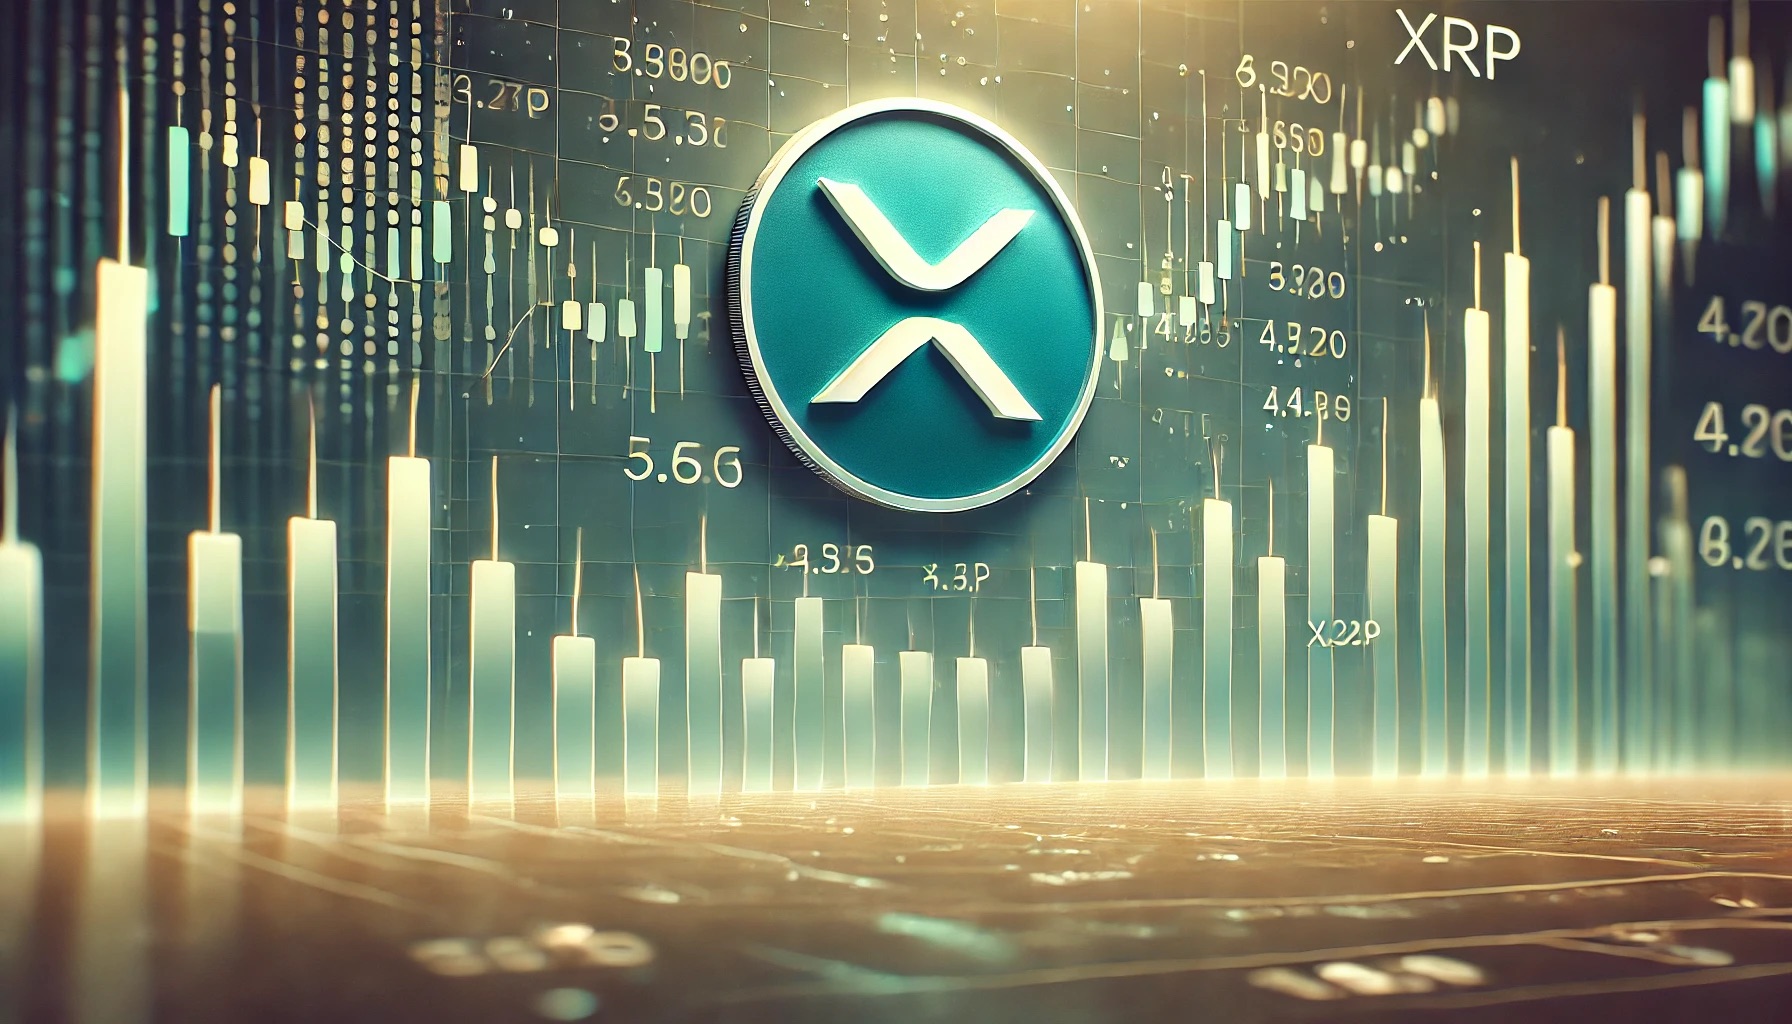 XRP Exhibiting Unusual On-Chain Behavior, How Will This Affect Price?